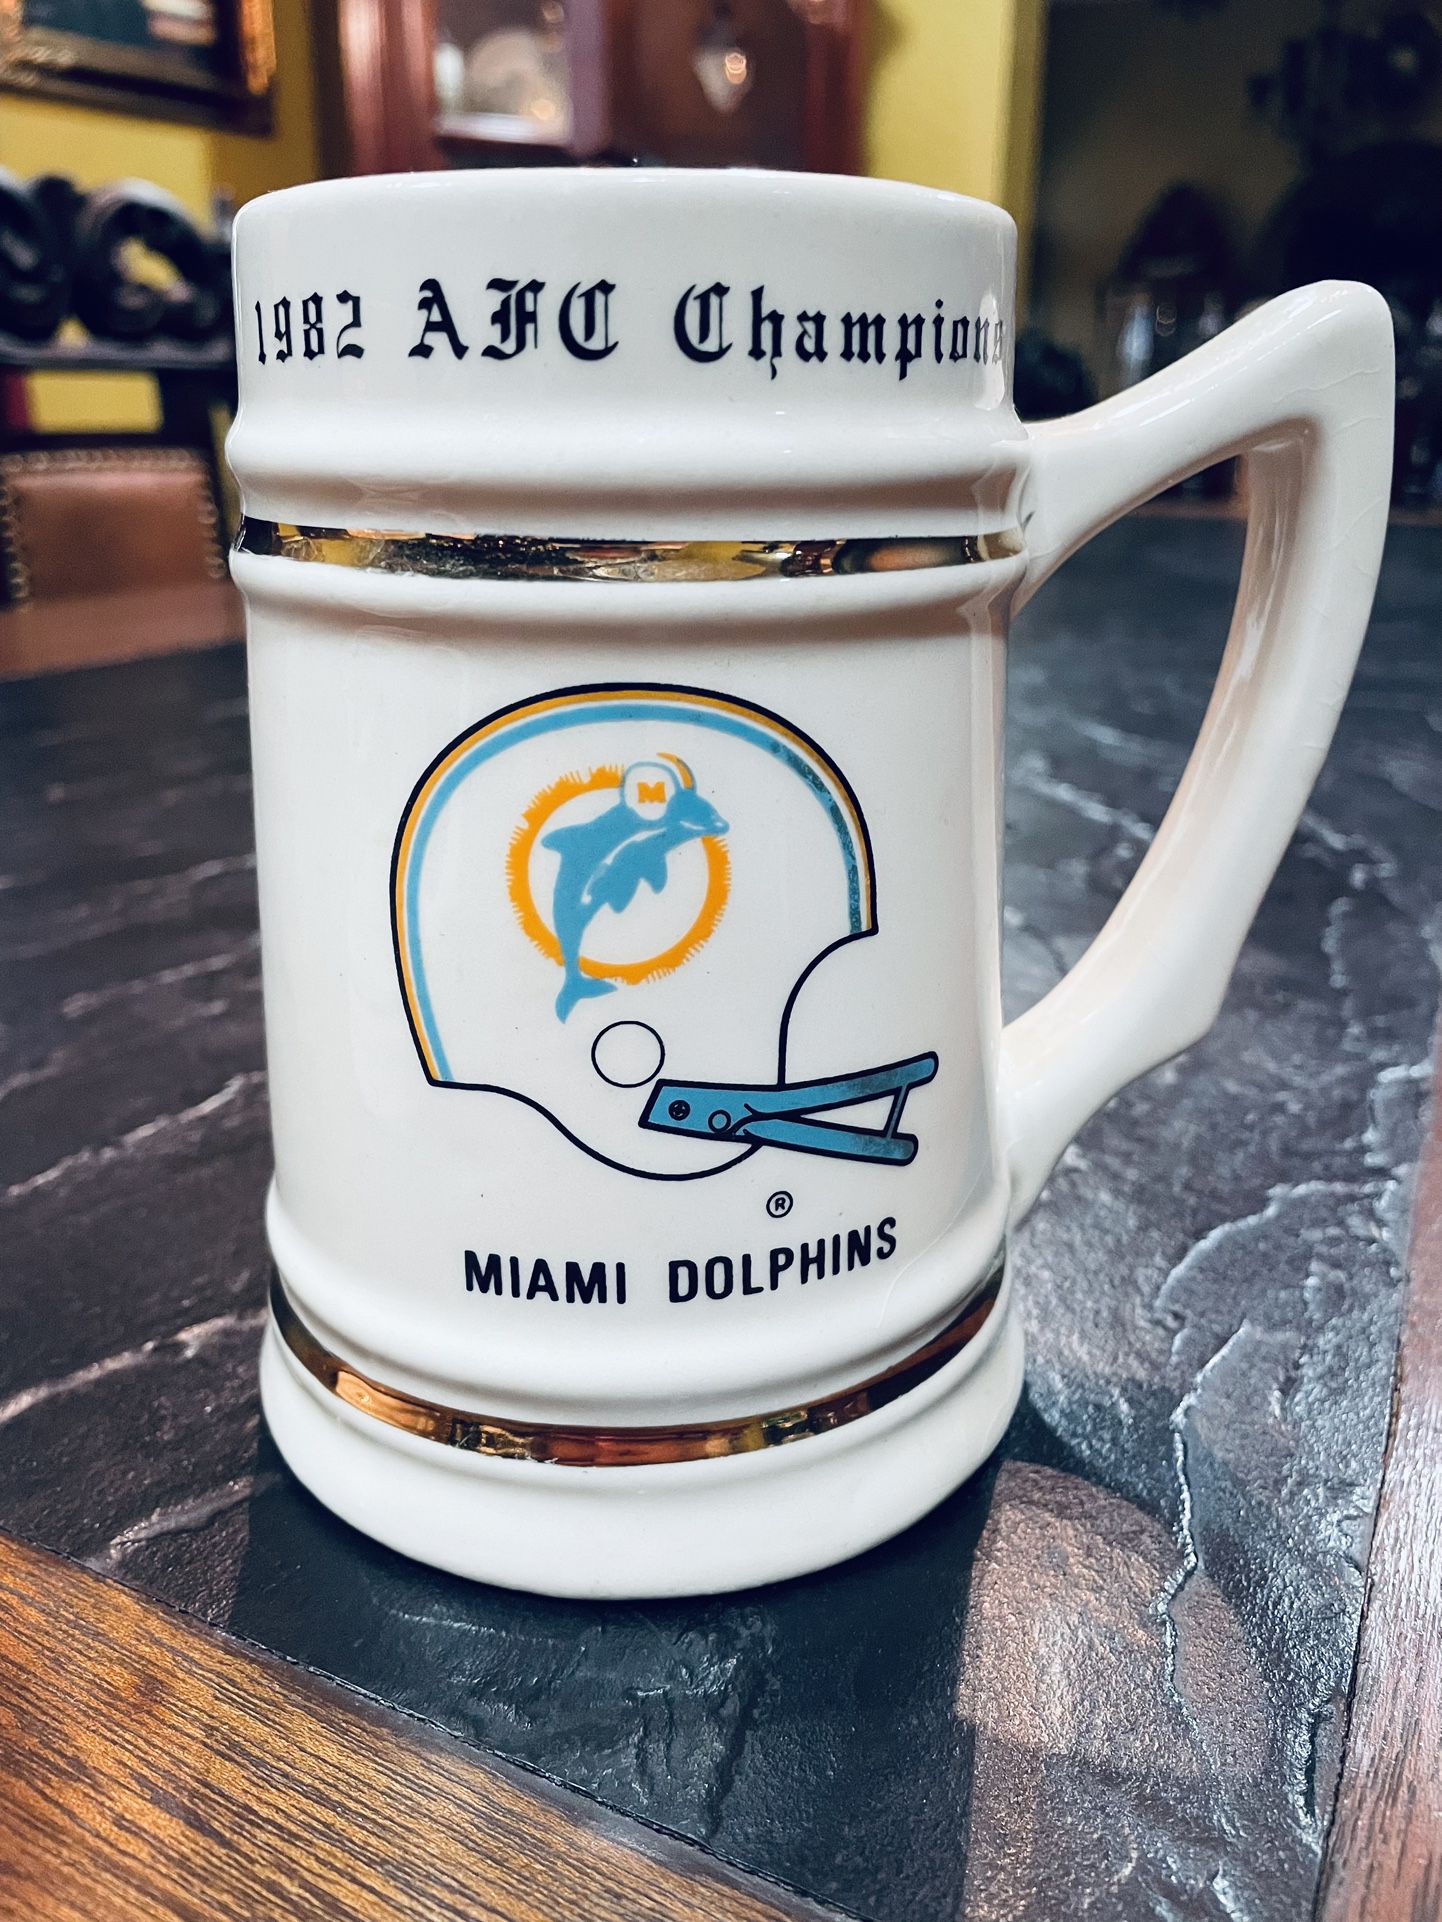 Miami Dolphins mugs $45.00 EACH, CASH TEXT FOR PRICES. 